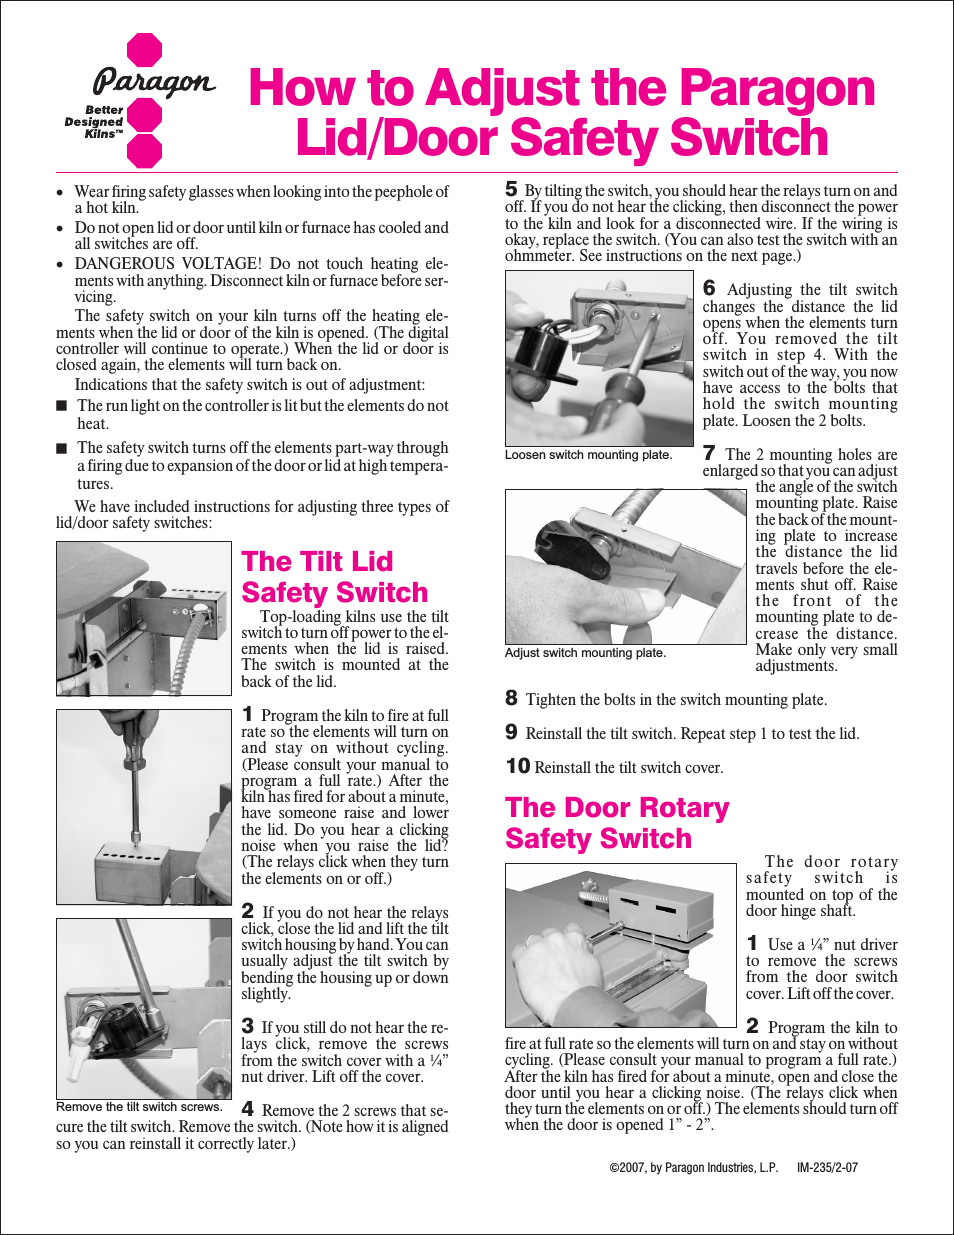 Lid/Door Safety Switch